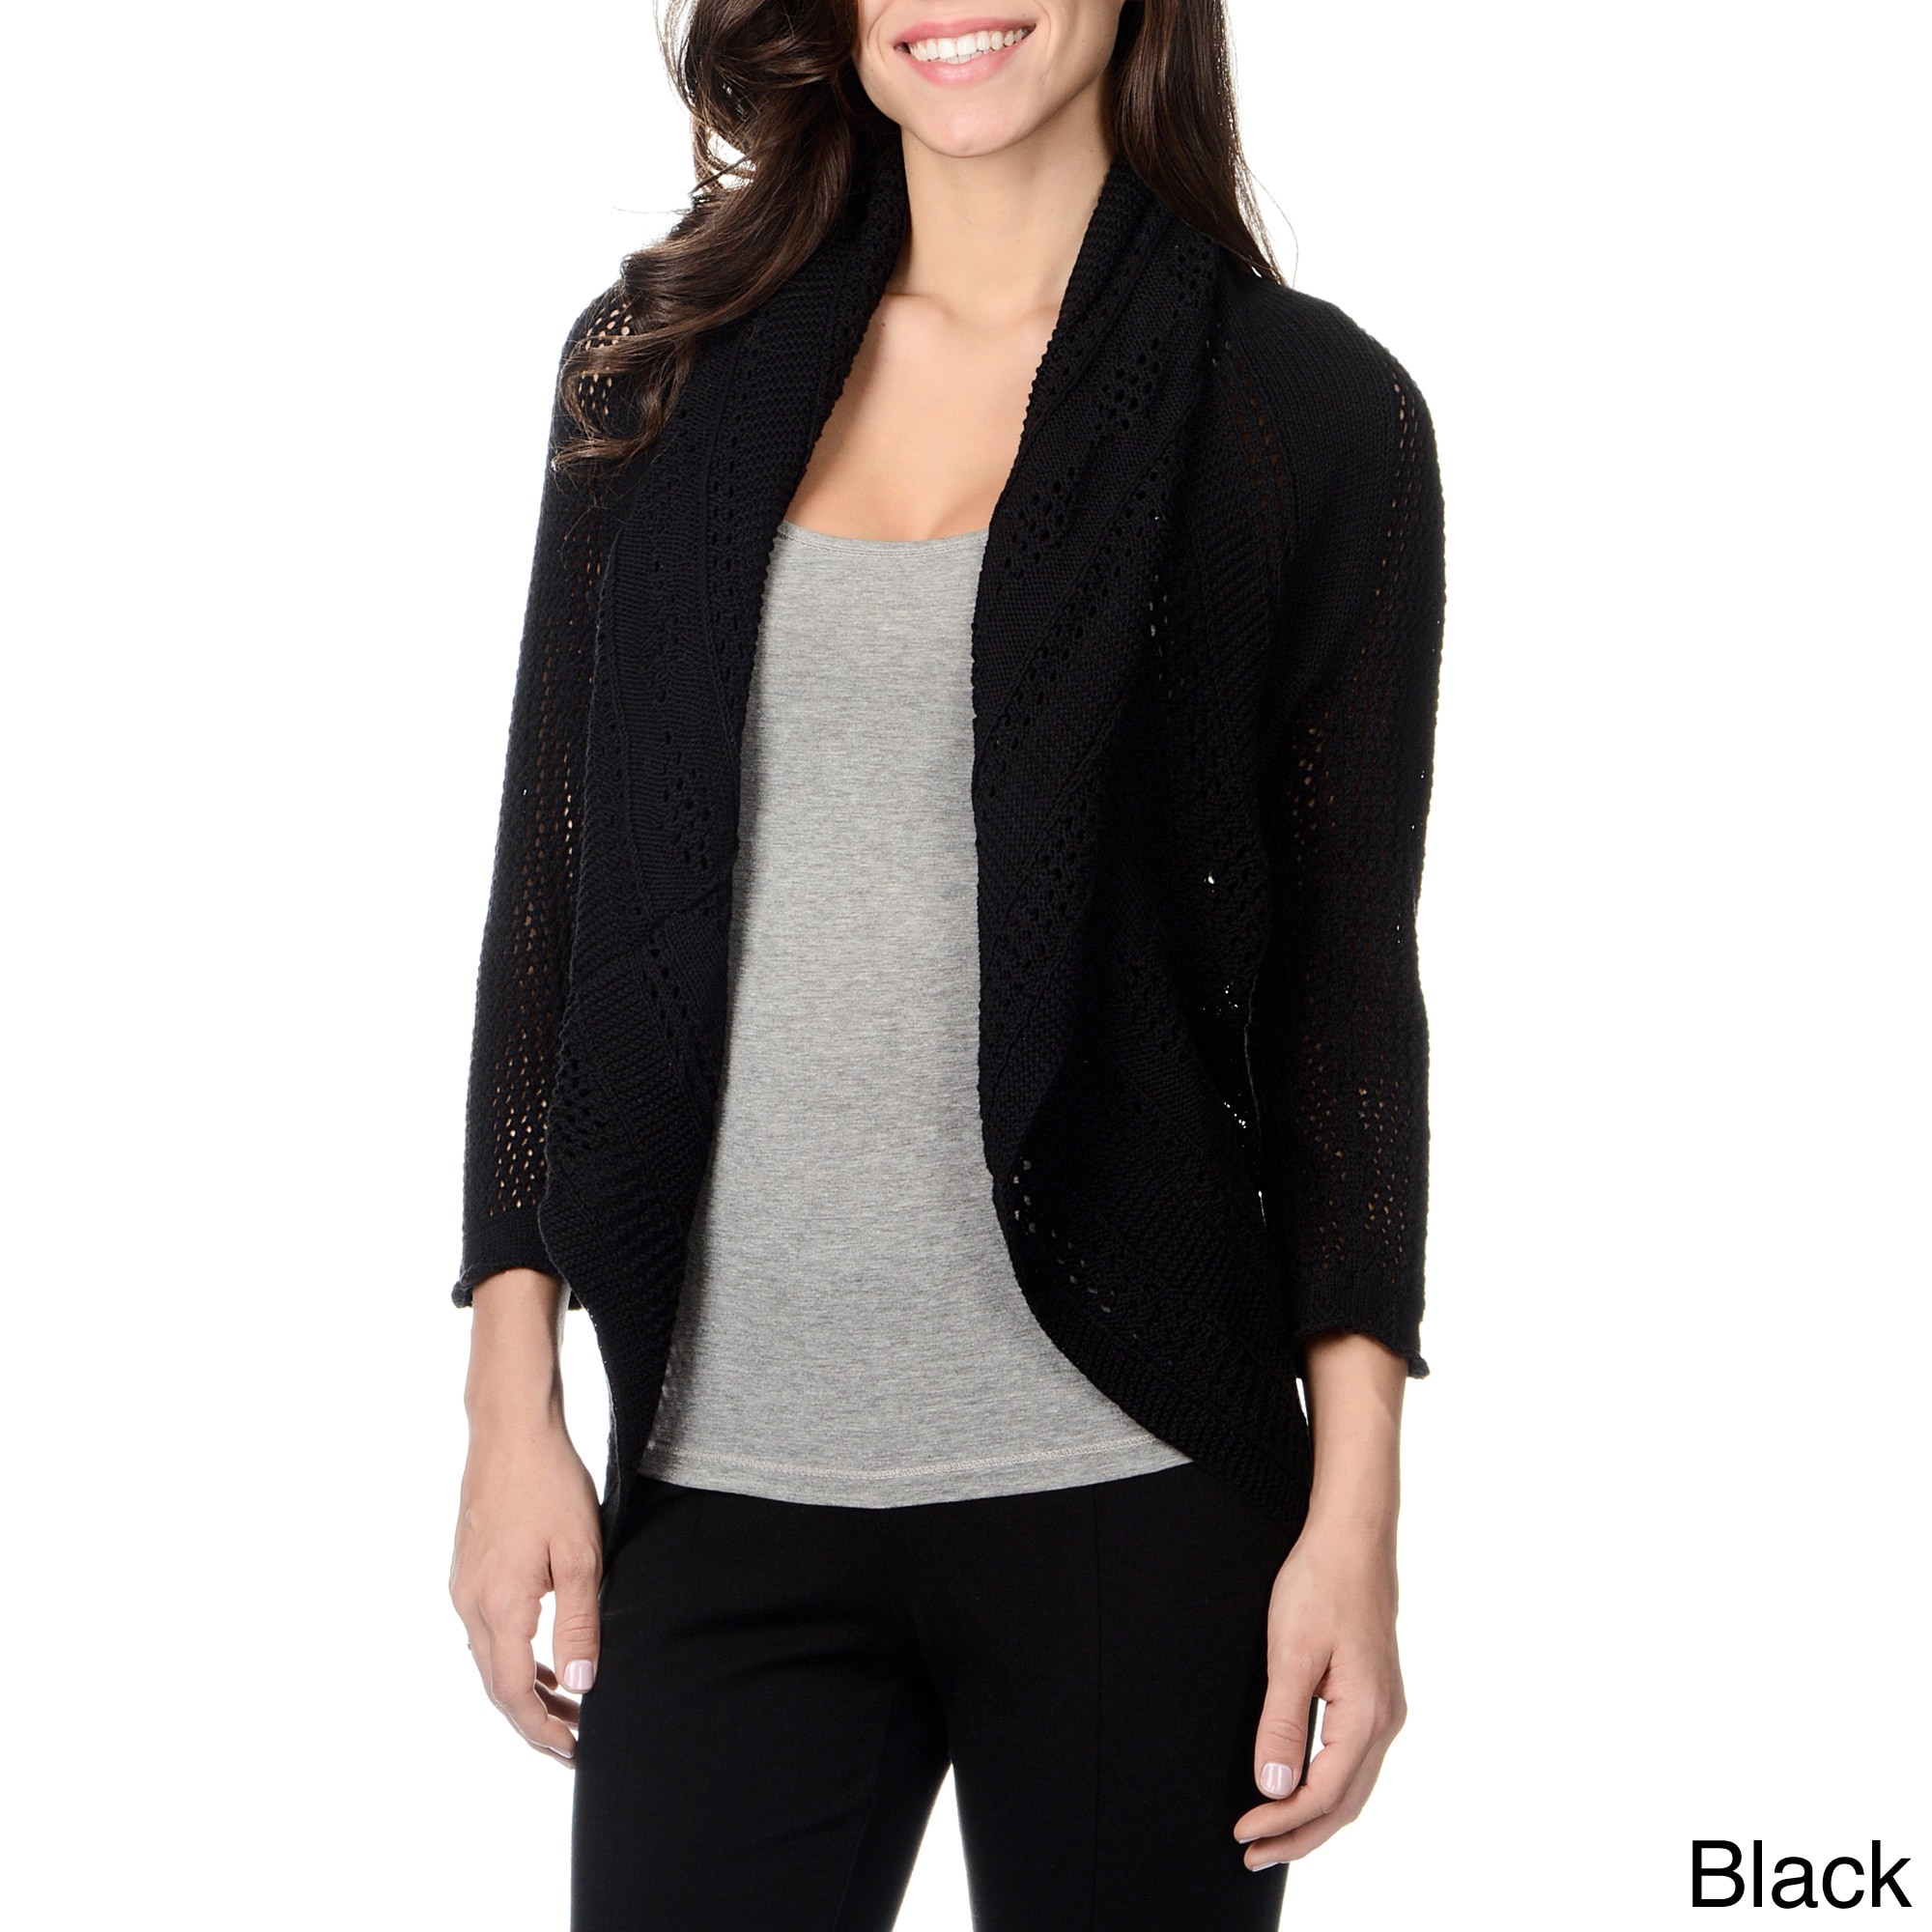 Chelsea and Theodore Chelsea   Theodore Womens Open Front Crochet Cardigan Black Size S (4  6)